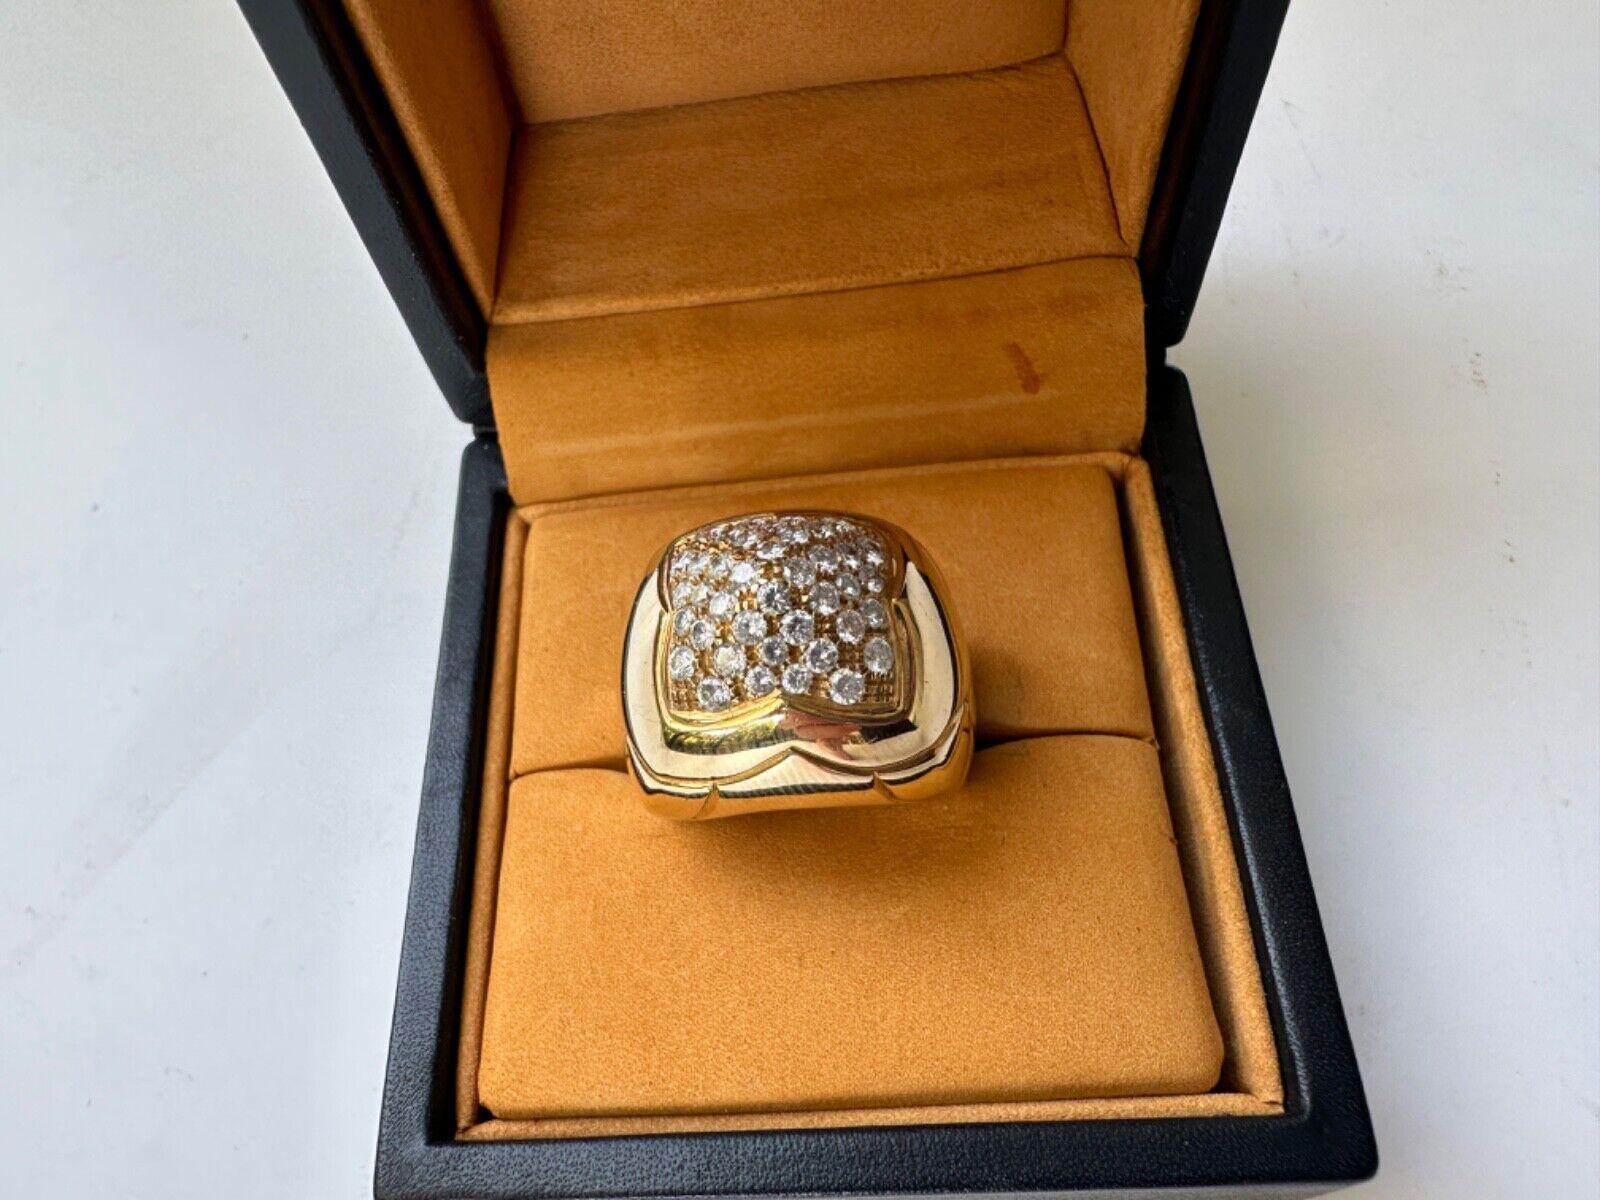 Bvlgari Italy 18k Yellow Gold & Diamond Pyramid Ring w/Box Vintage

Here is your chance to purchase a beautiful and highly collectible designer ring.  
The ring is made by Bvlgari Italy and comes from the Pyramid Collection.  The ring comes with a